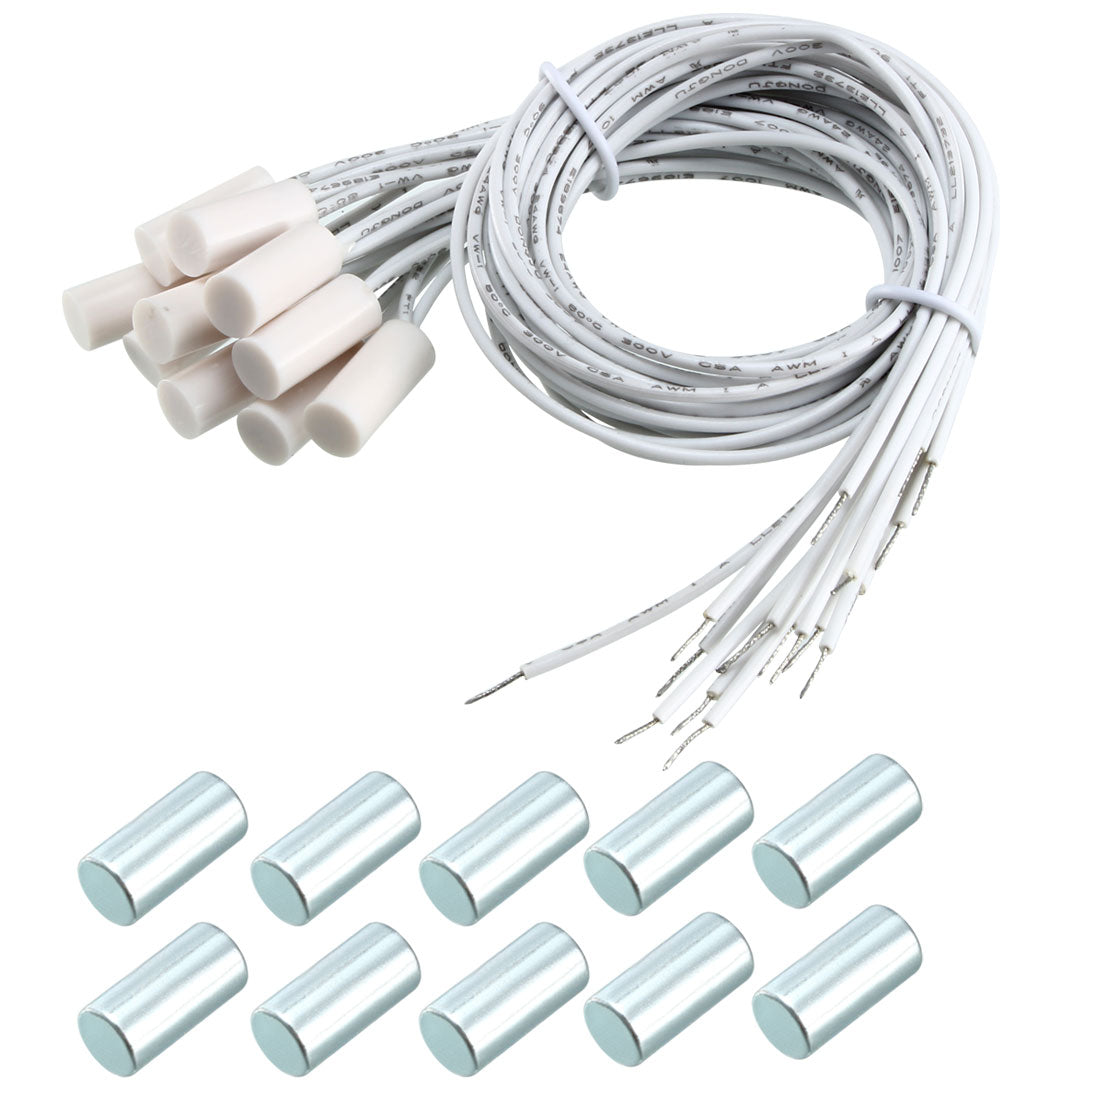 uxcell Uxcell 10pcs HC-34A NC Recessed Wired Window Gate Contact Sensor Alarm Magnetic Reed Switch White